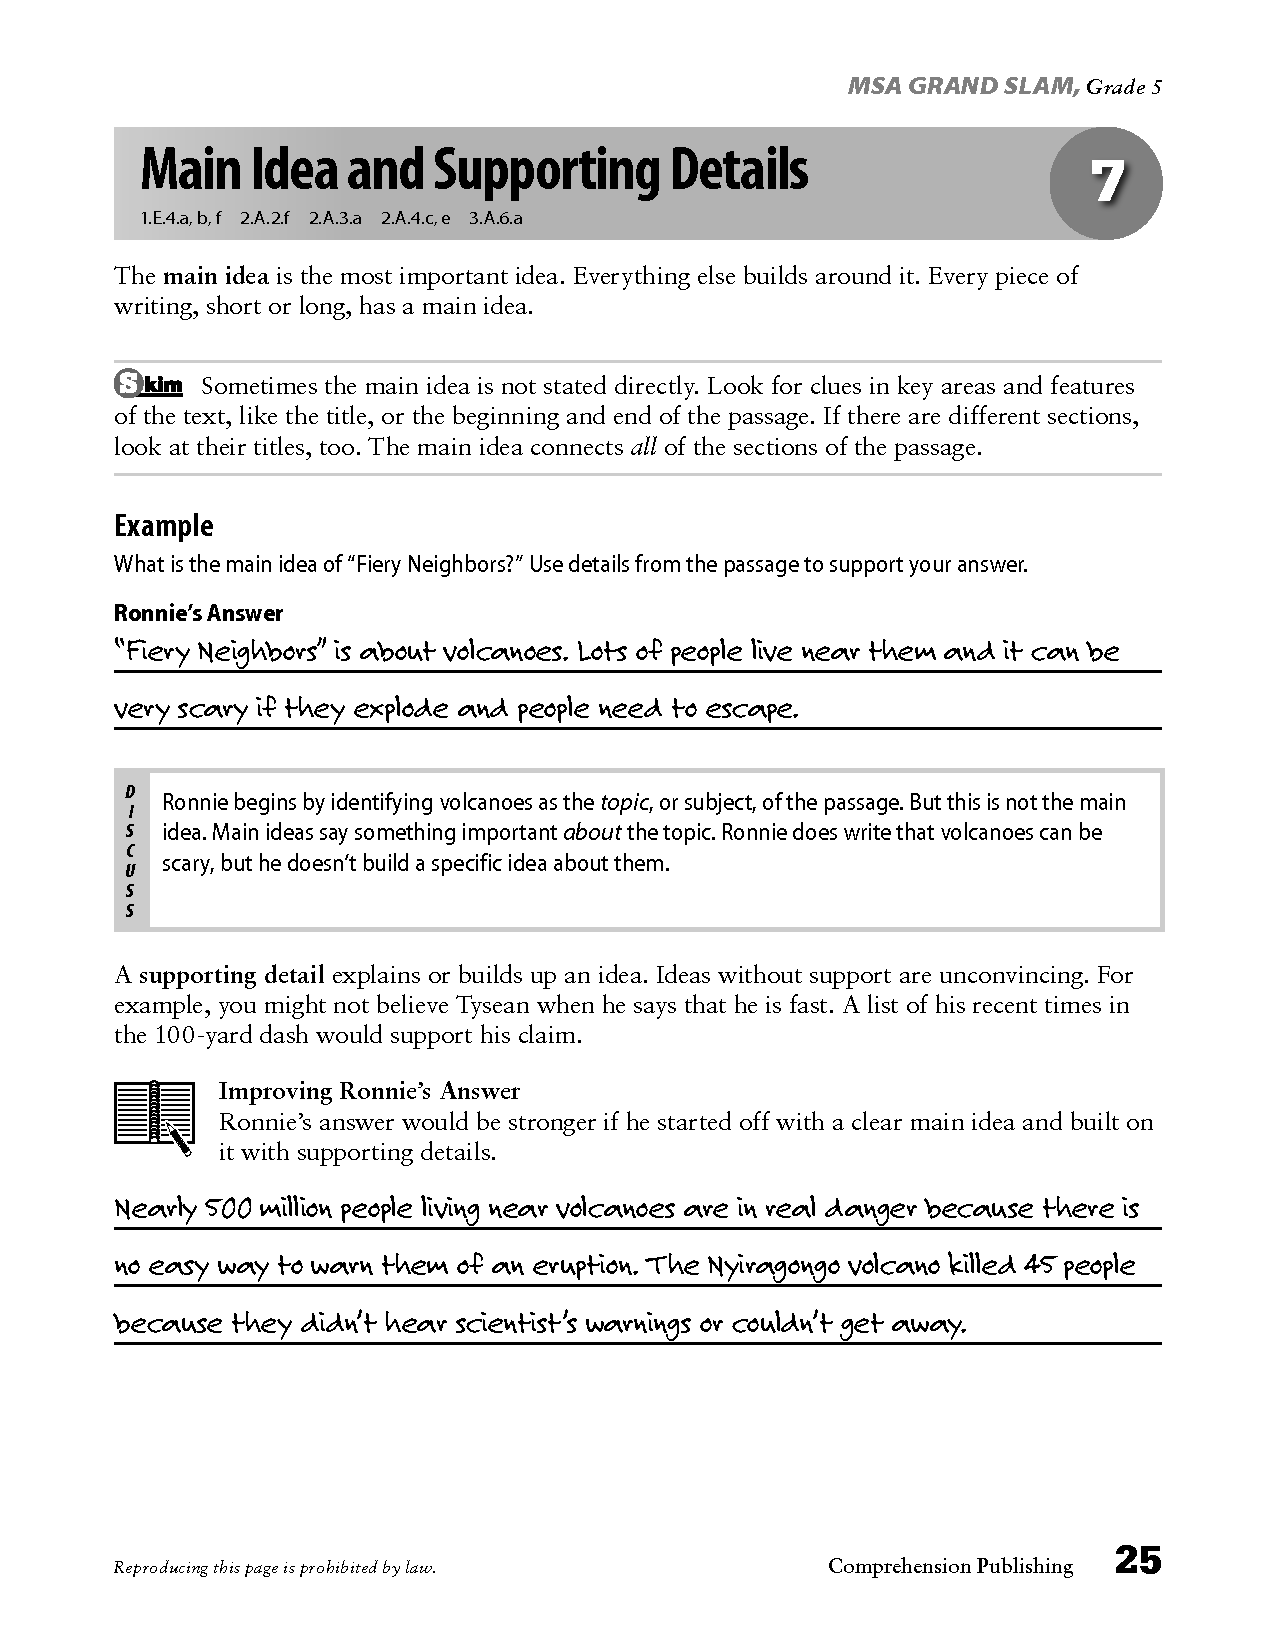 13-best-images-of-idea-supporting-and-main-worksheets-details-practice